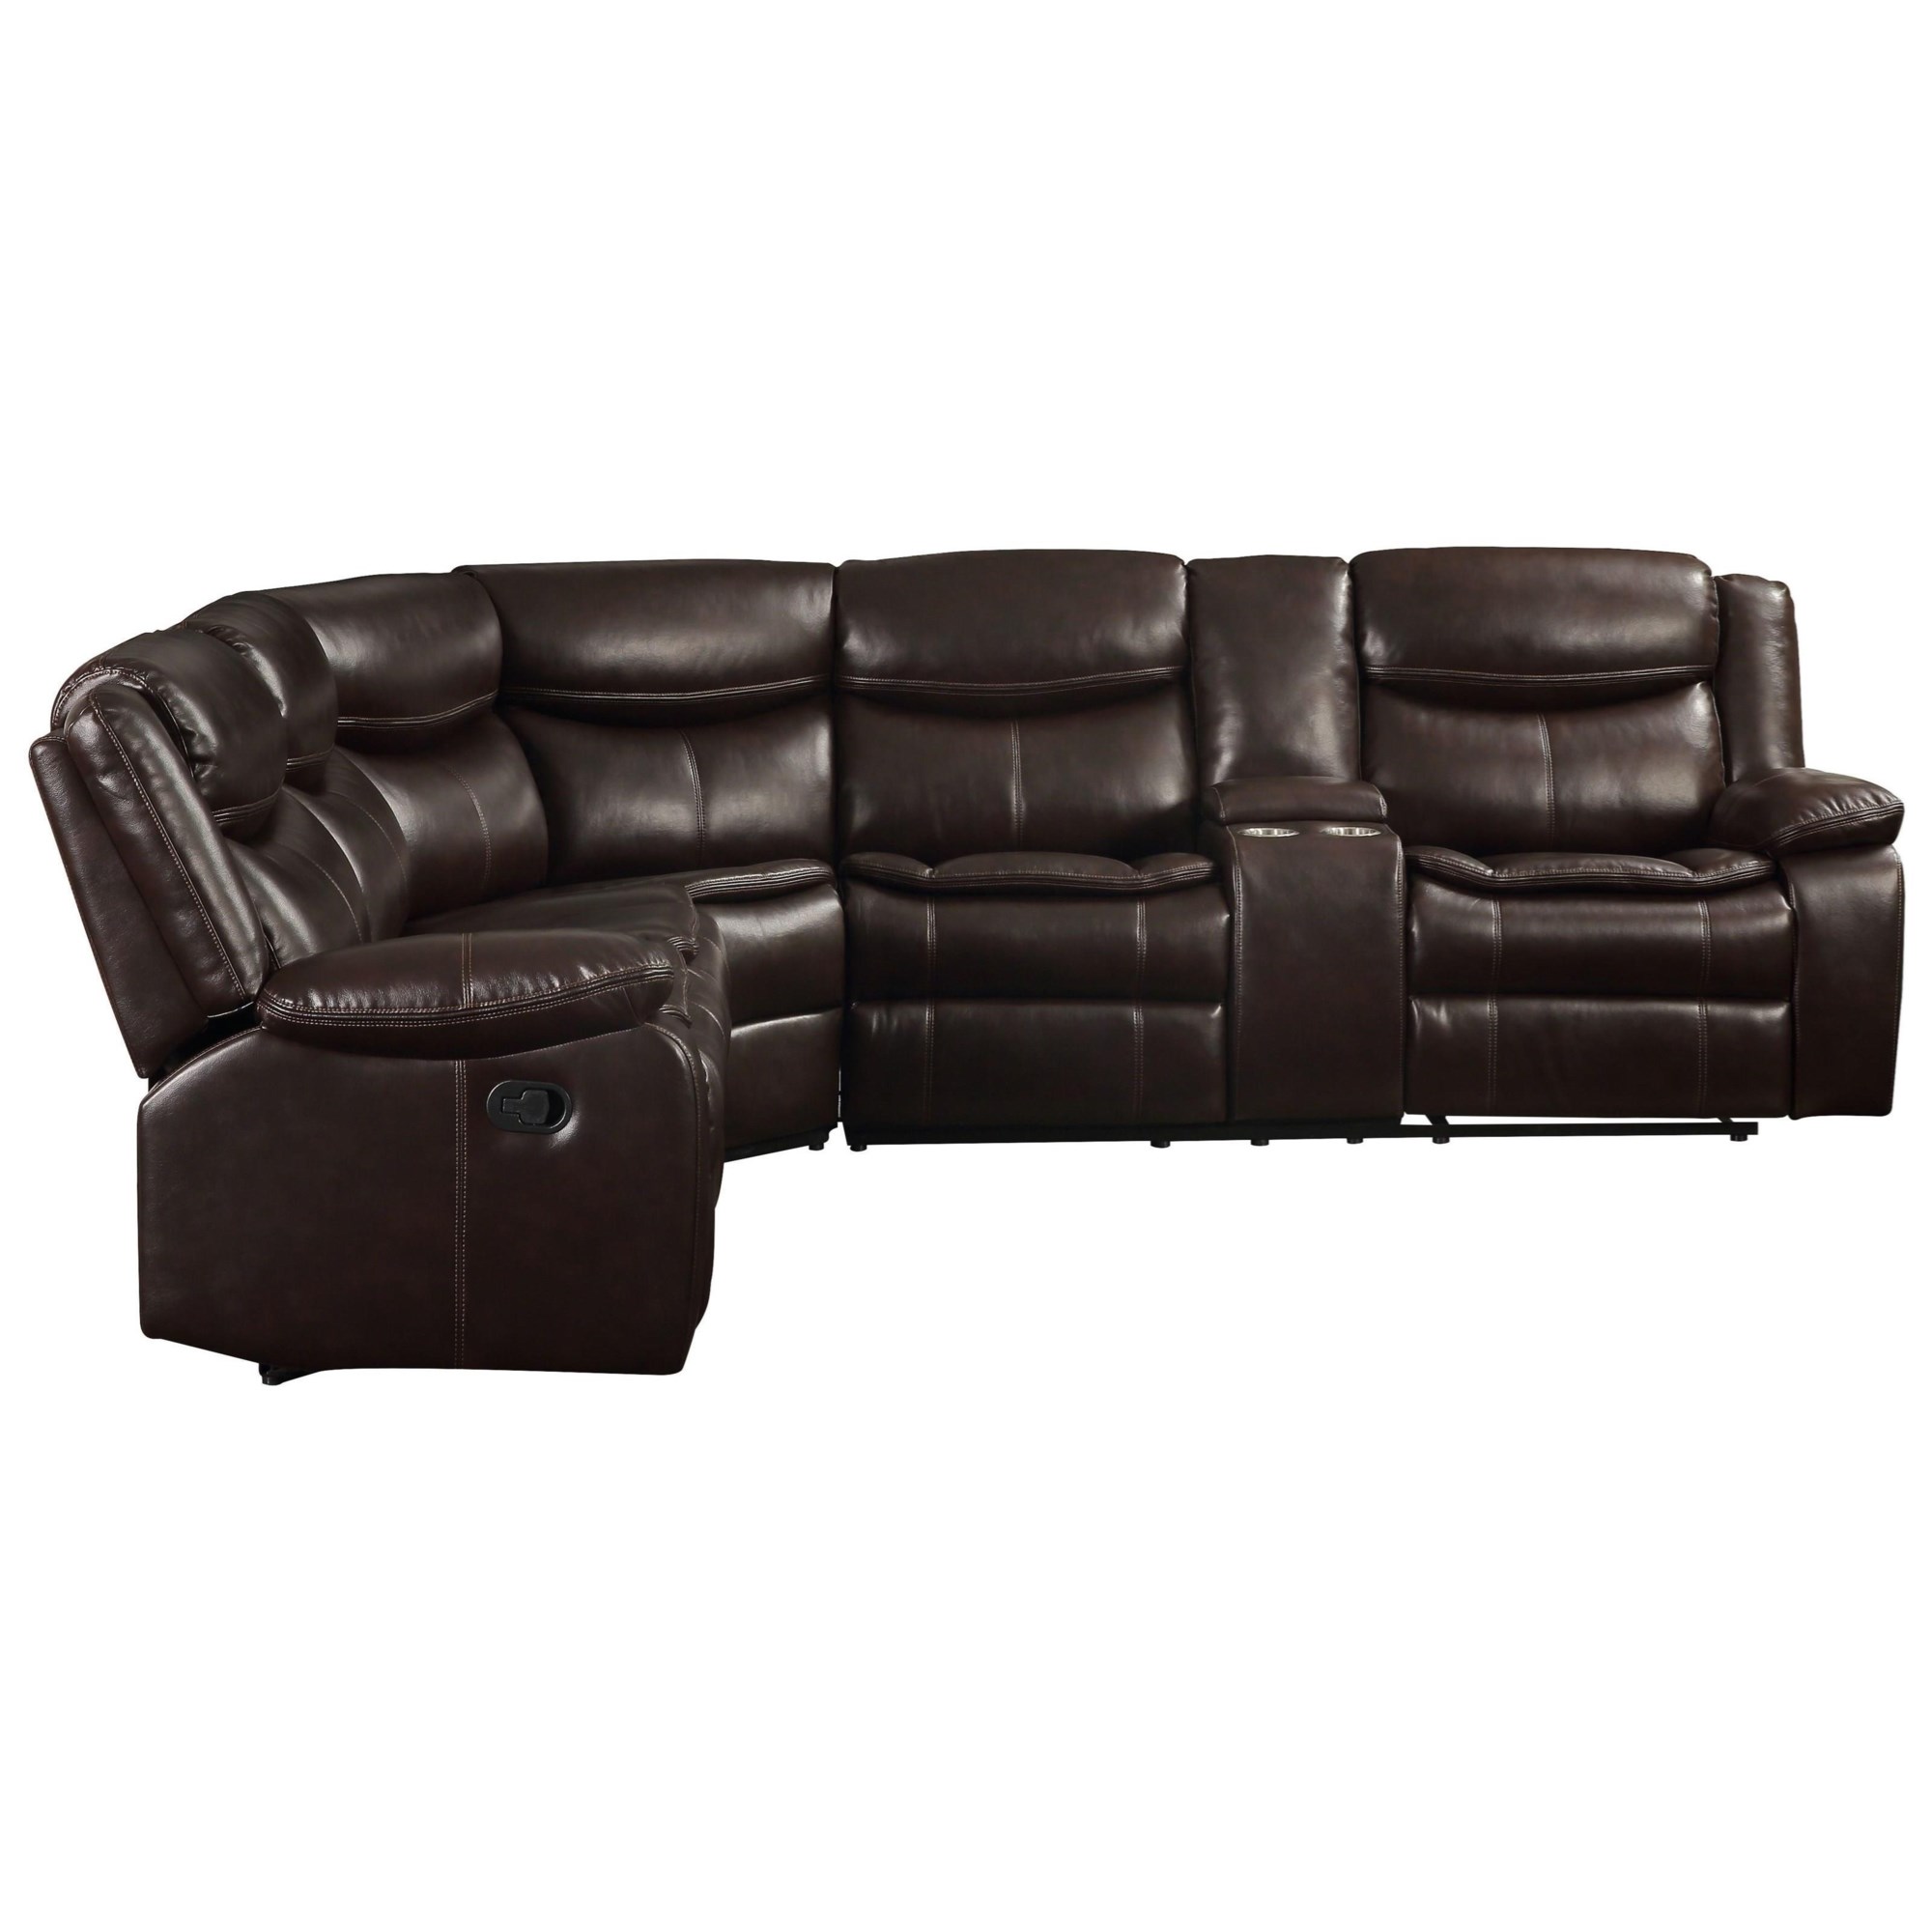 Acme Furniture Olwen 54590 Contemporary Power Reclining Sectional